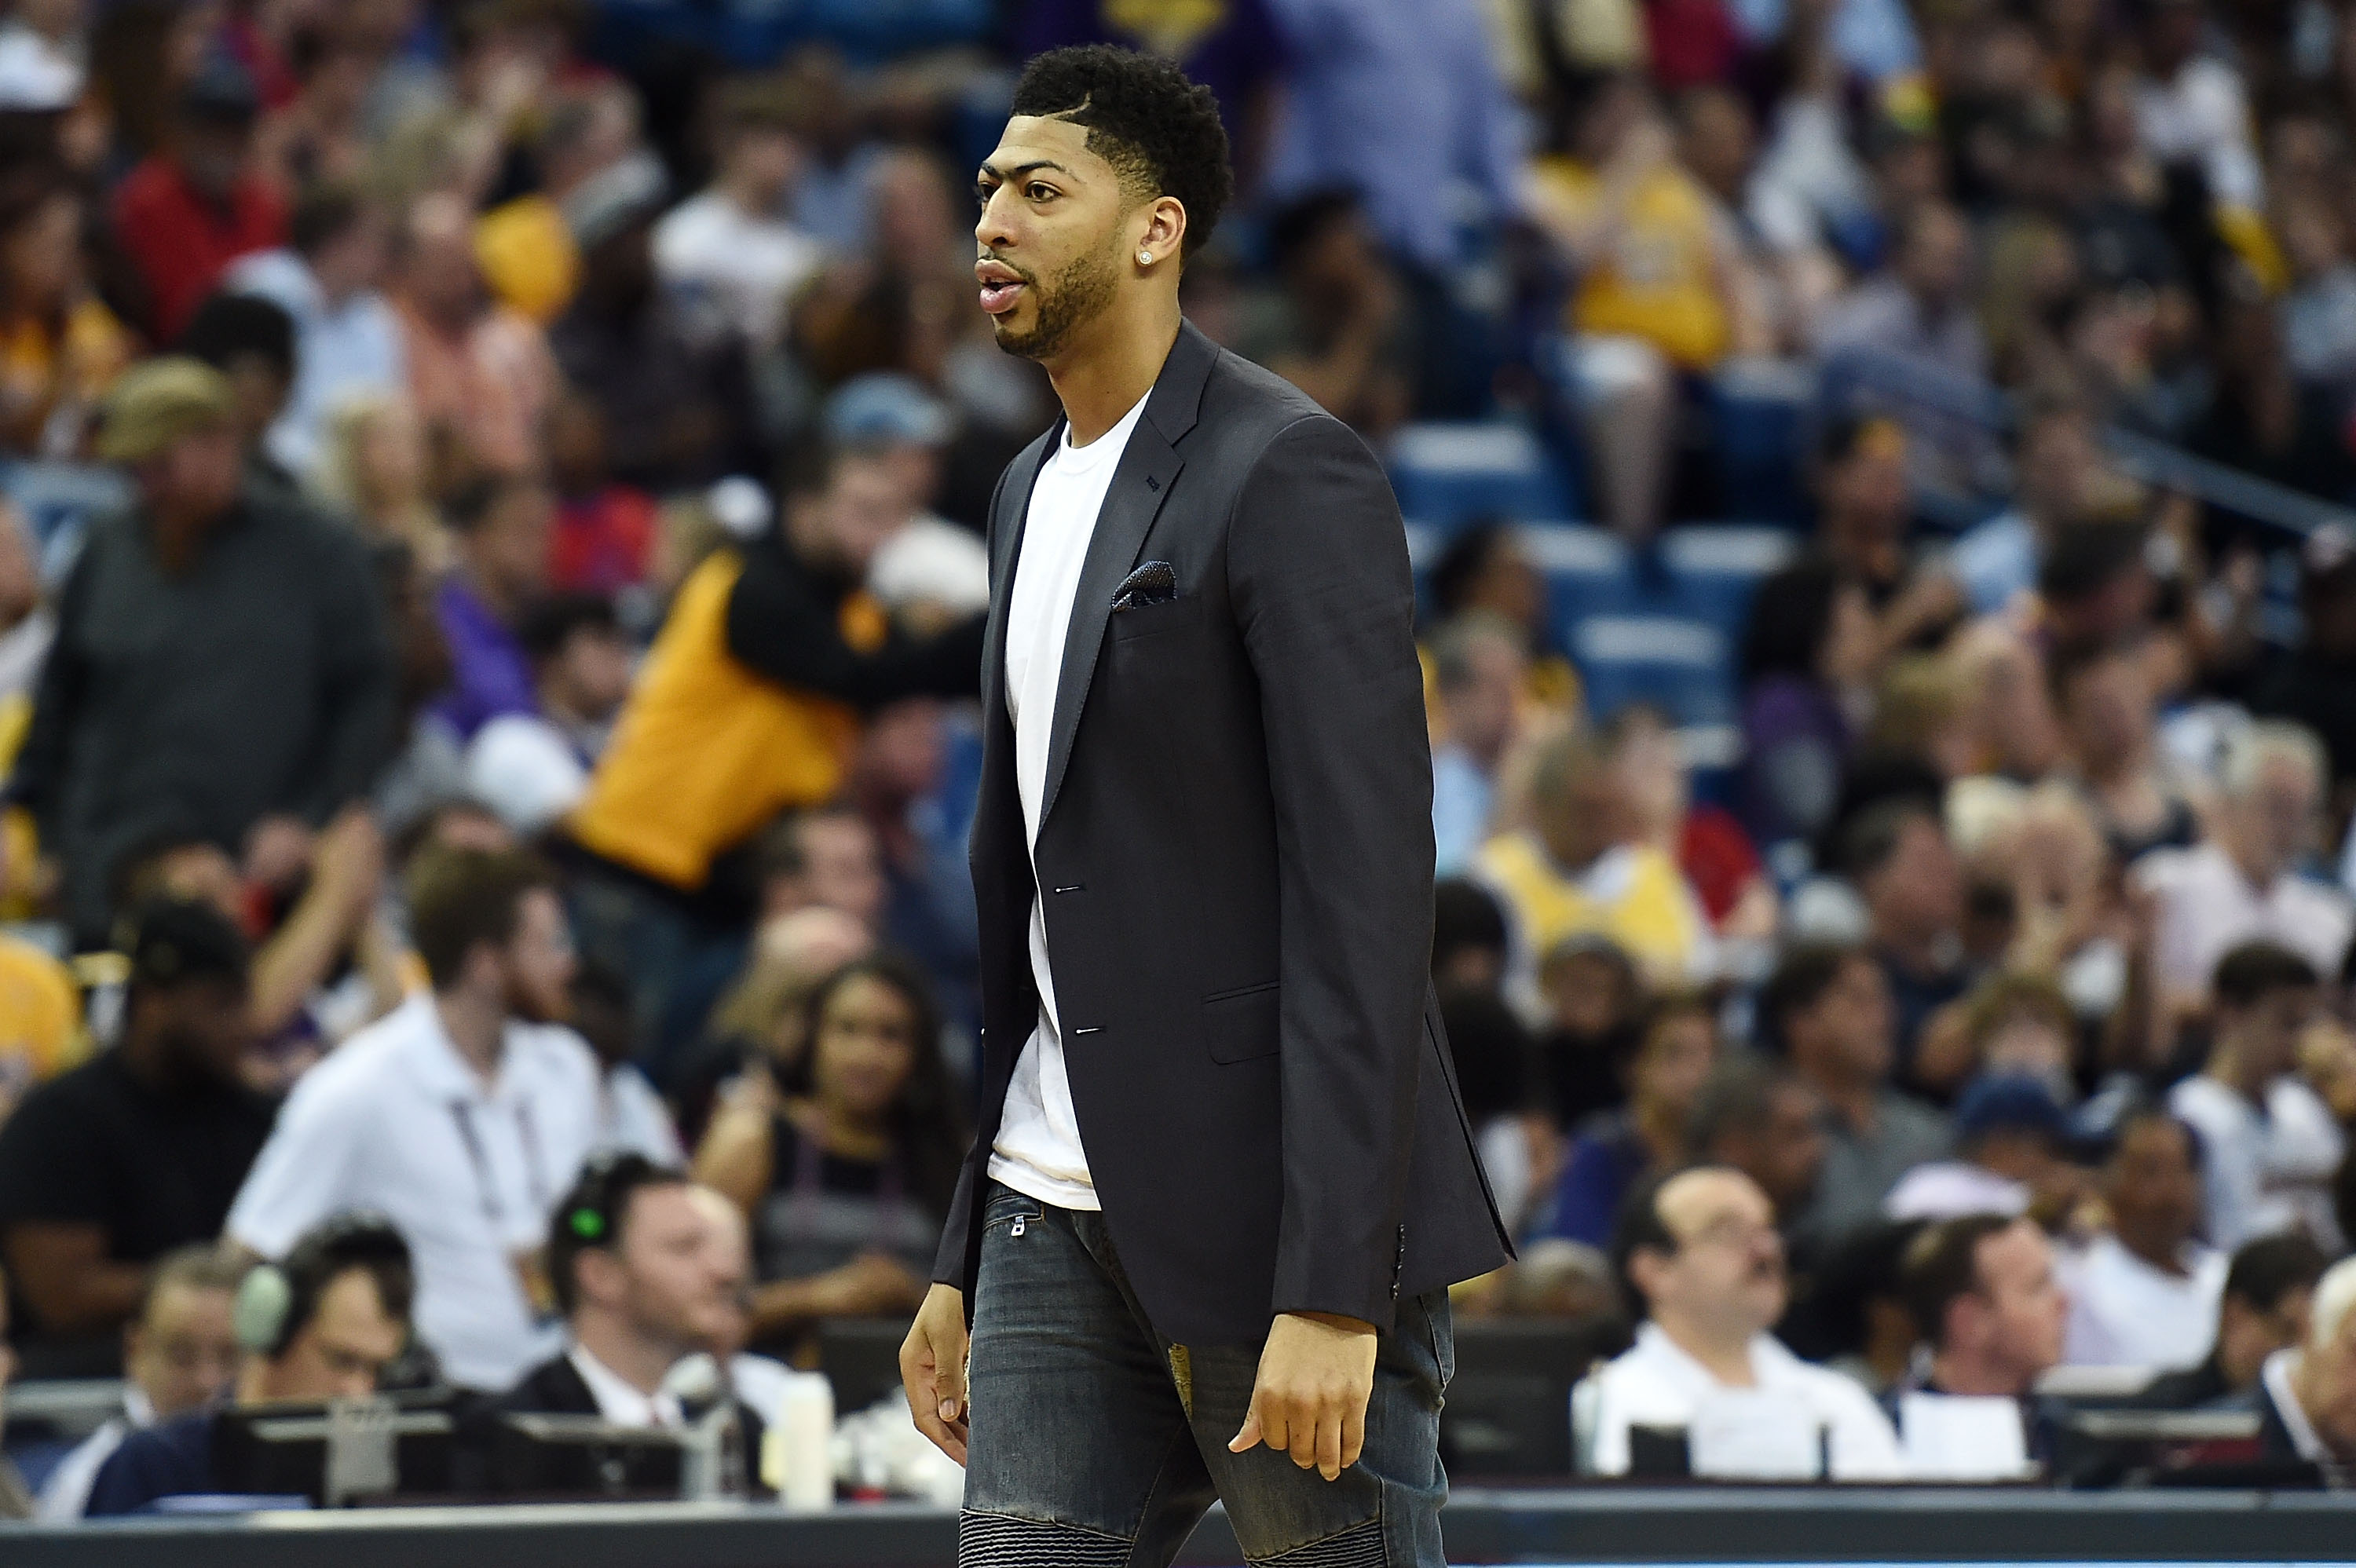 NEW ORLEANS, LA - APRIL 08: Anthony Davis #23 of the New Orleans Pelicans watches action during a game against the Los Angeles Lakers at the Smoothie King Center on April 8, 2016 in New Orleans, Louisiana. NOTE TO USER: User expressly acknowledges and agrees that, by downloading and or using this photograph, User is consenting to the terms and conditions of the Getty Images License Agreement.   Stacy Revere/Getty Images/AFP